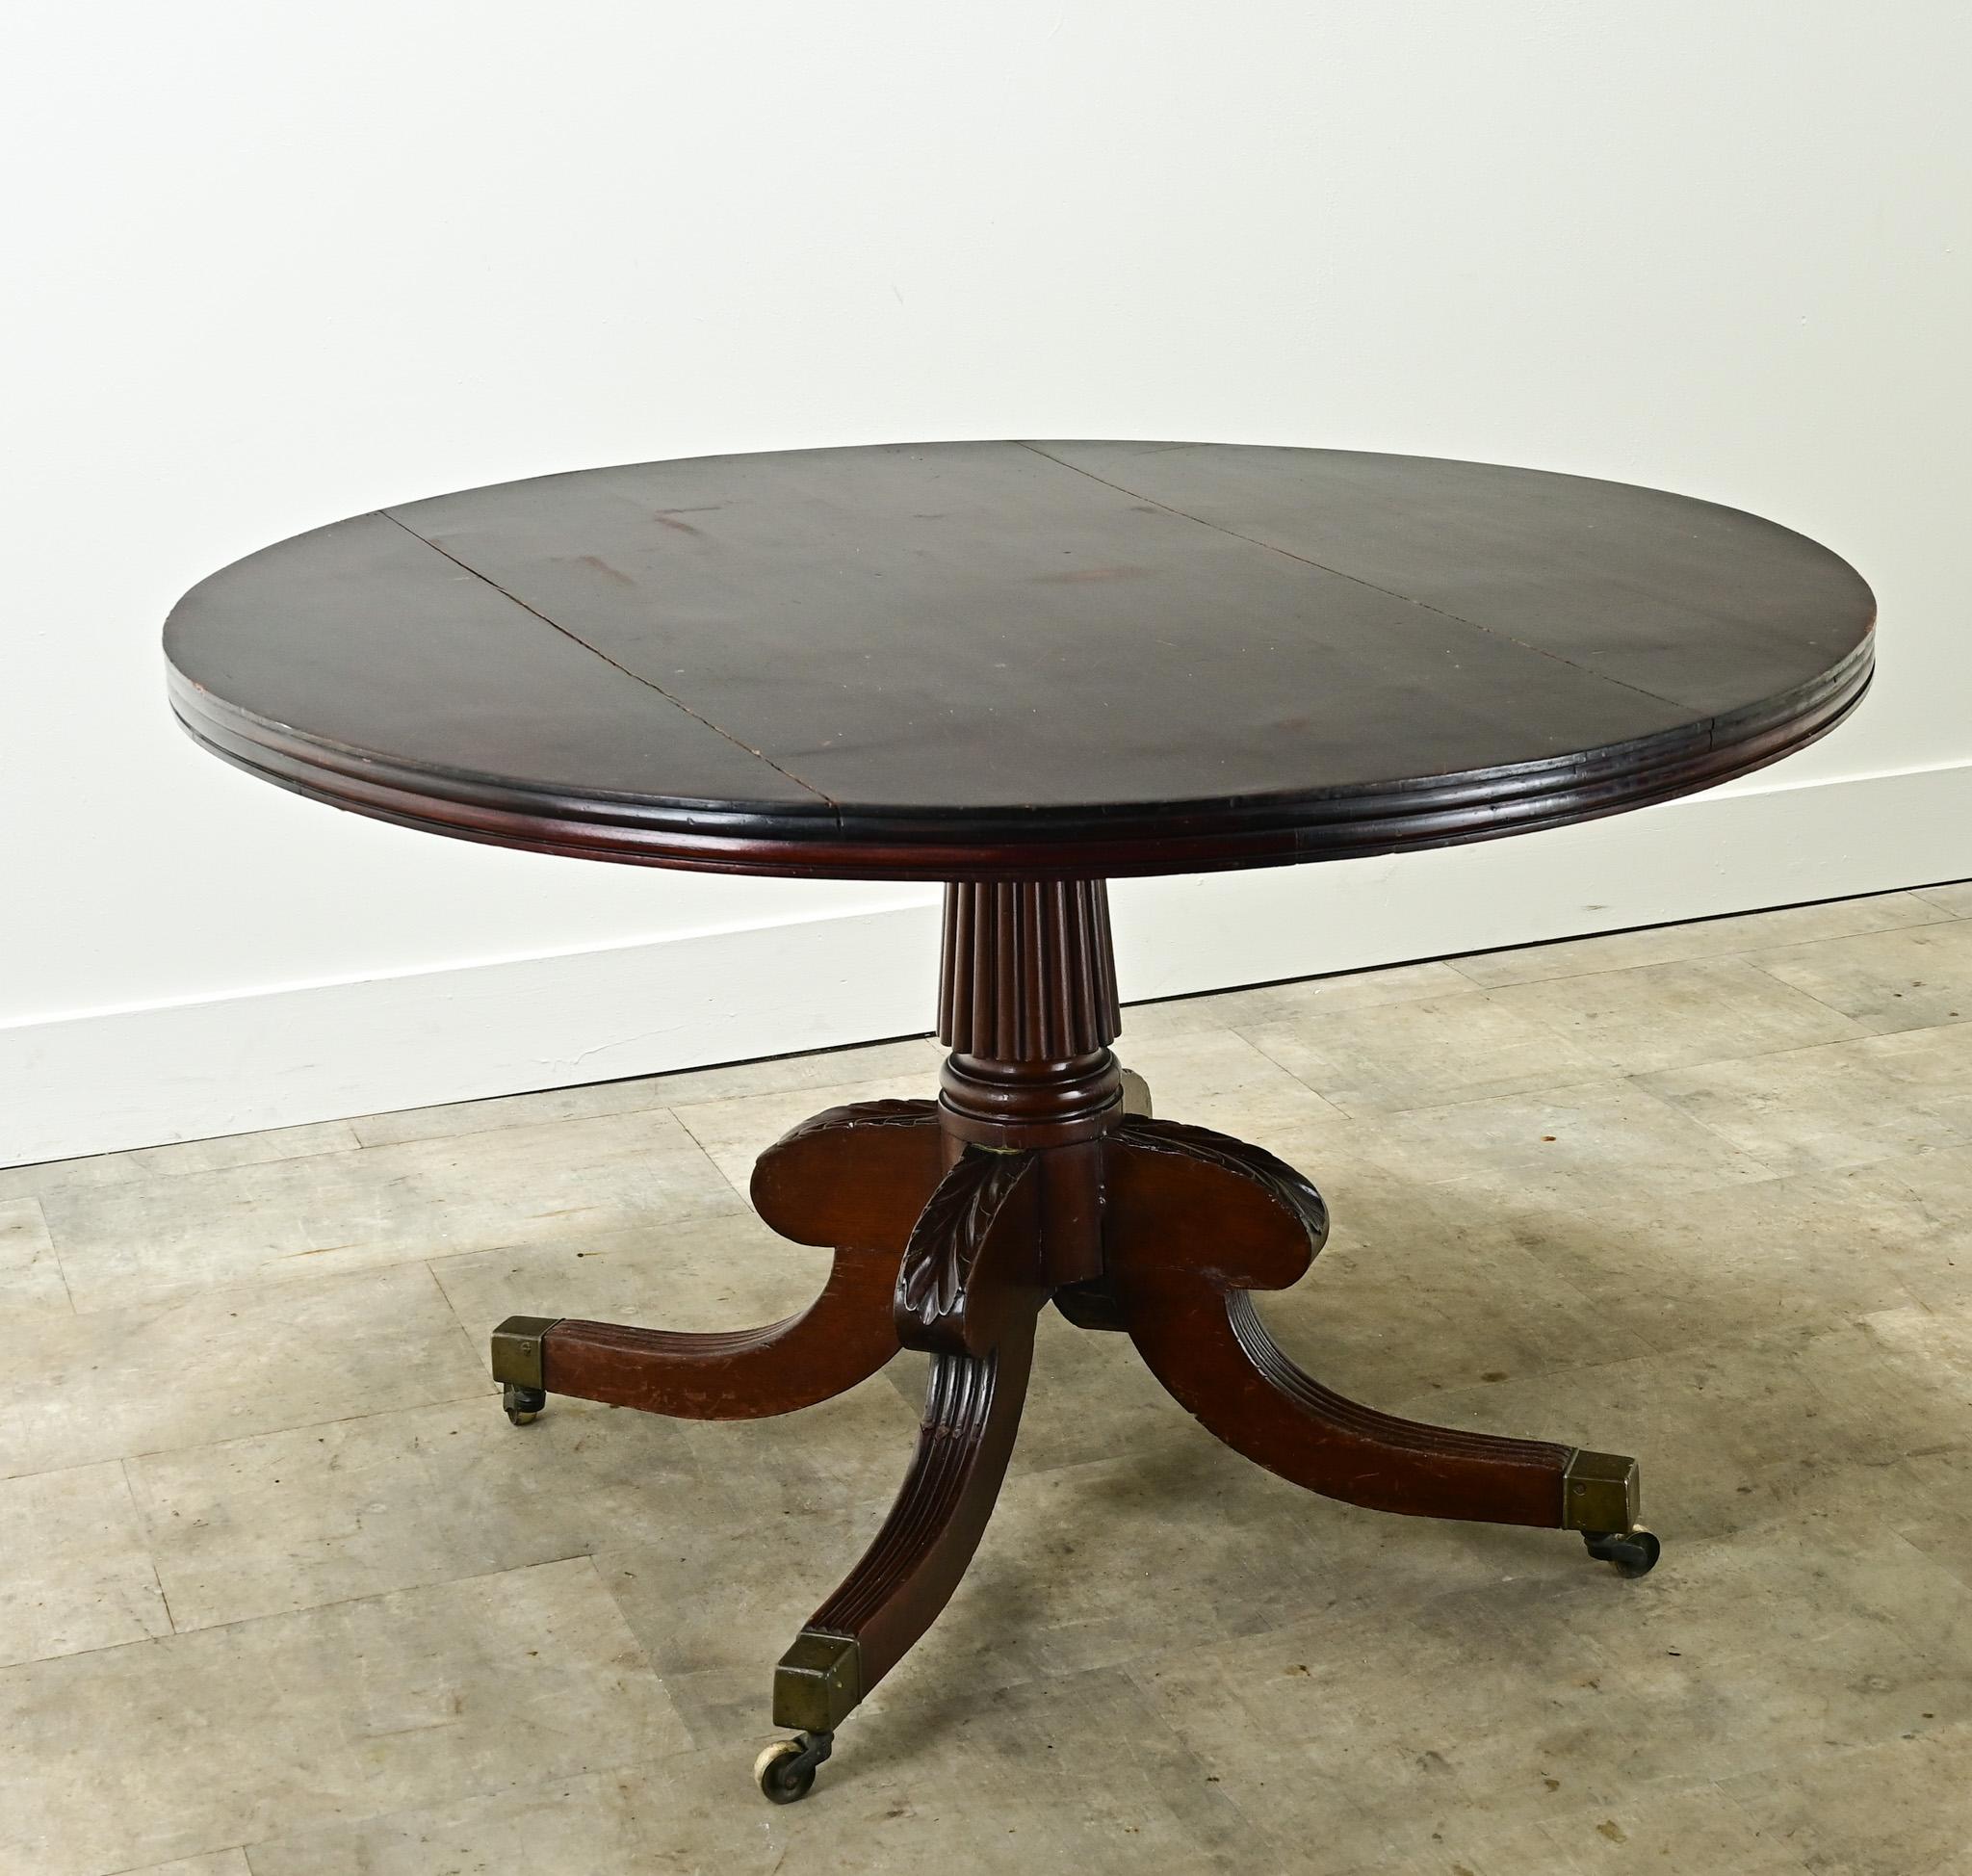 The perfect round dining table to comfortably seat four people. This dutch tilt top table is made of mahogany and has the ability to tilt upright. The pedestal base has a reeded center style with four shaped and carved splayed legs ending on brass